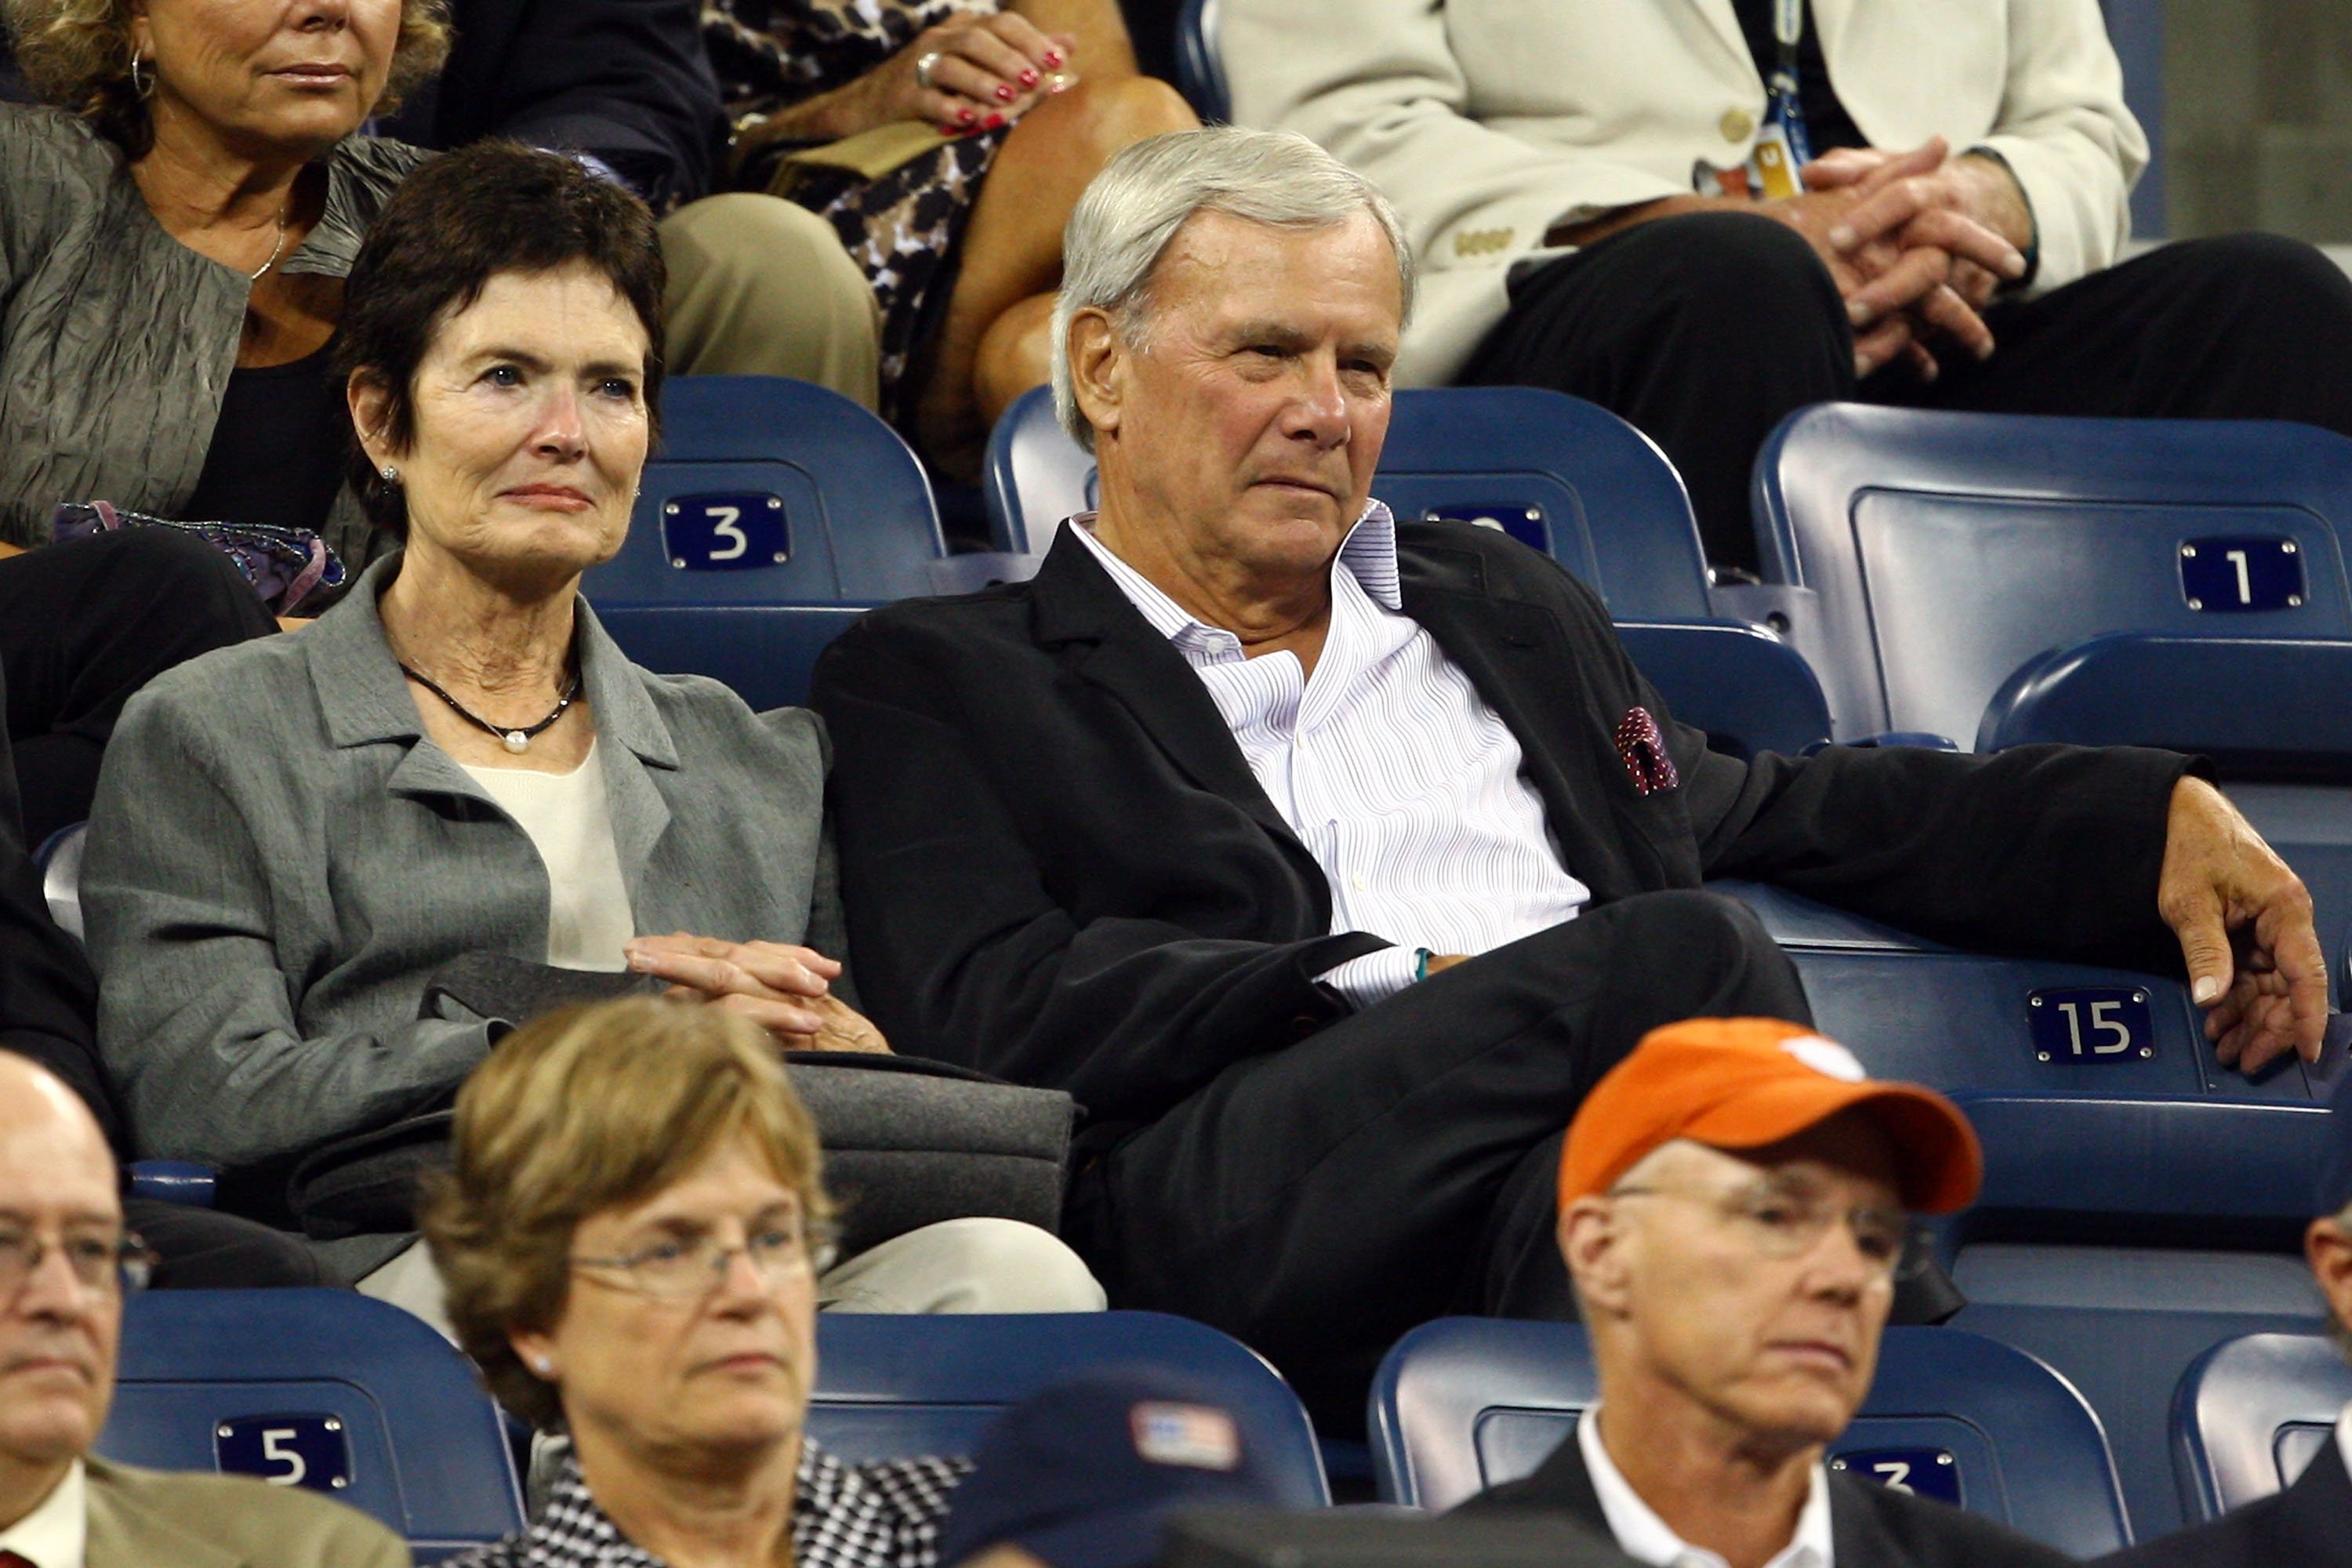 Tom Brokaw and his wife Meredith Lynn Auld during day nine of the 2009 US Open at the USTA Billie Jean King National Tennis Center on September 8, 2009 in New York City. | Source: Getty Images